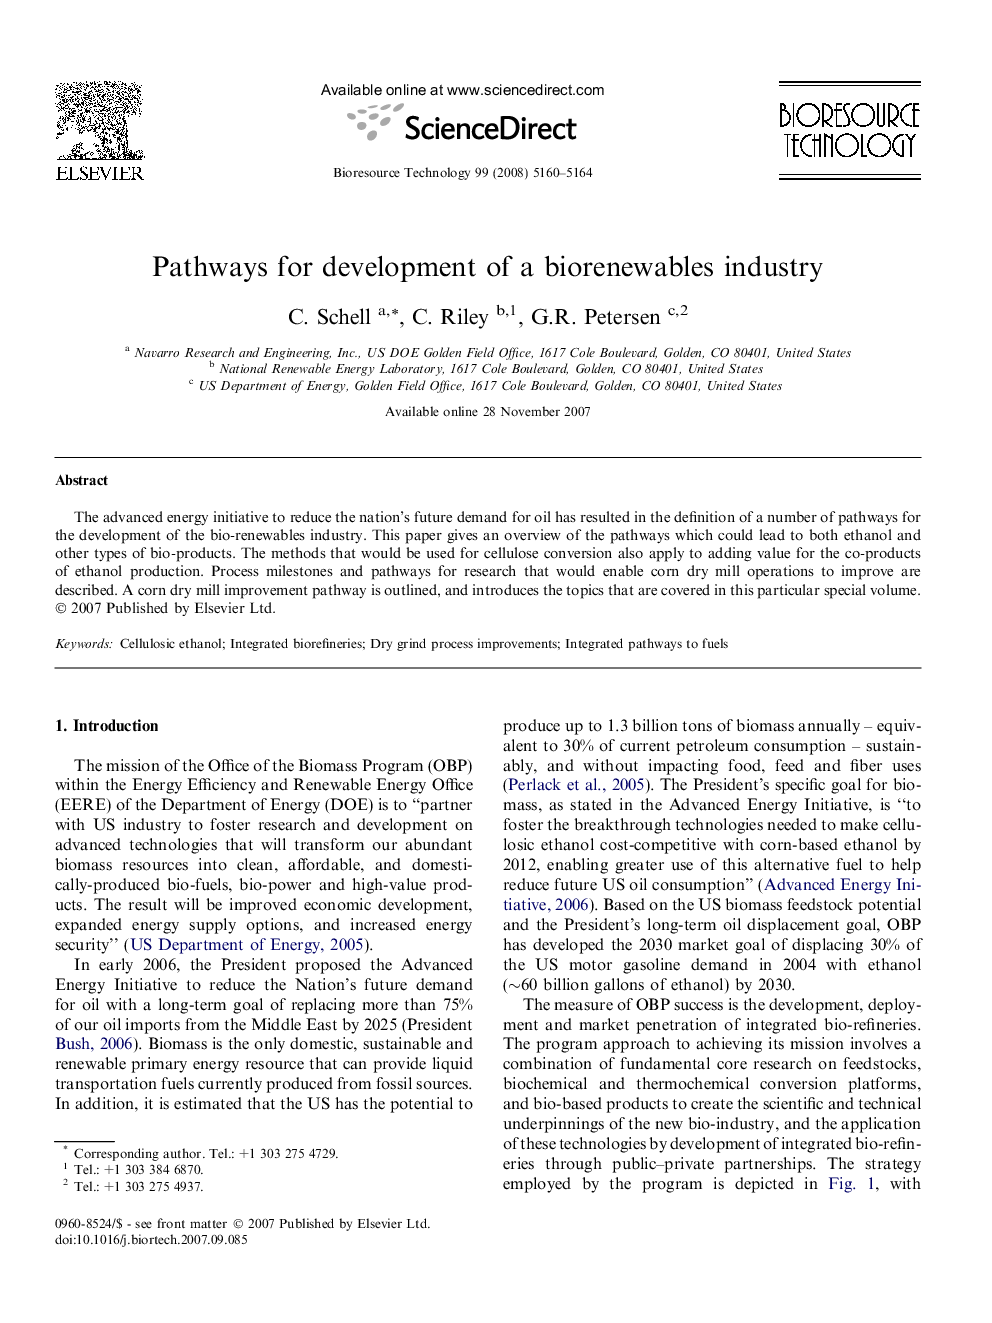 Pathways for development of a biorenewables industry